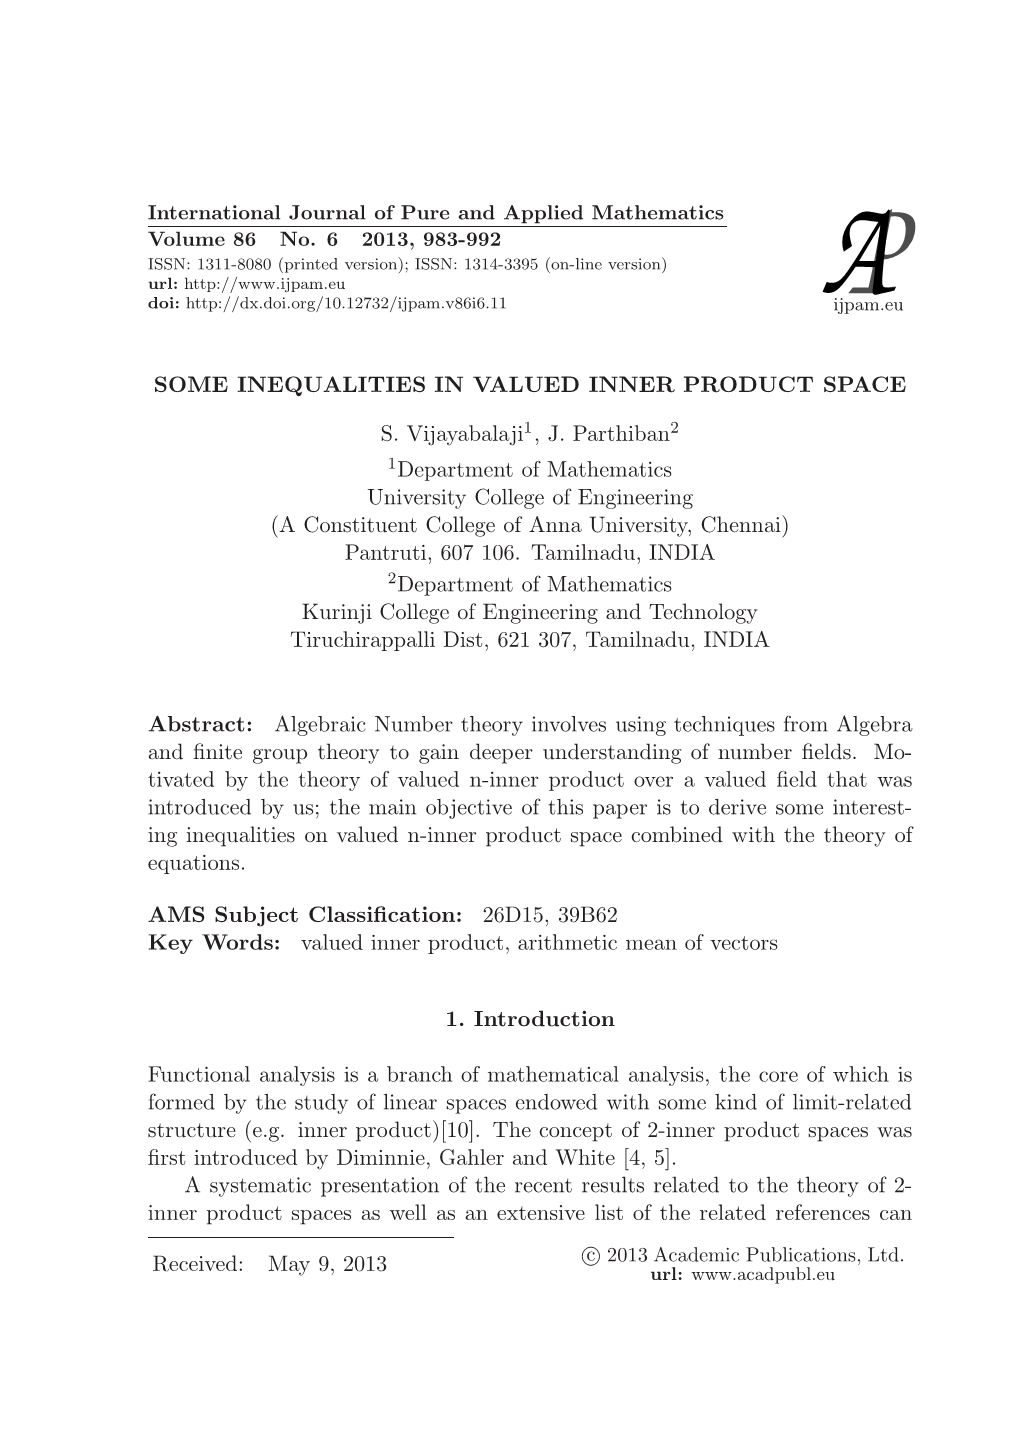 Some Inequalities in Valued Inner Product Space S